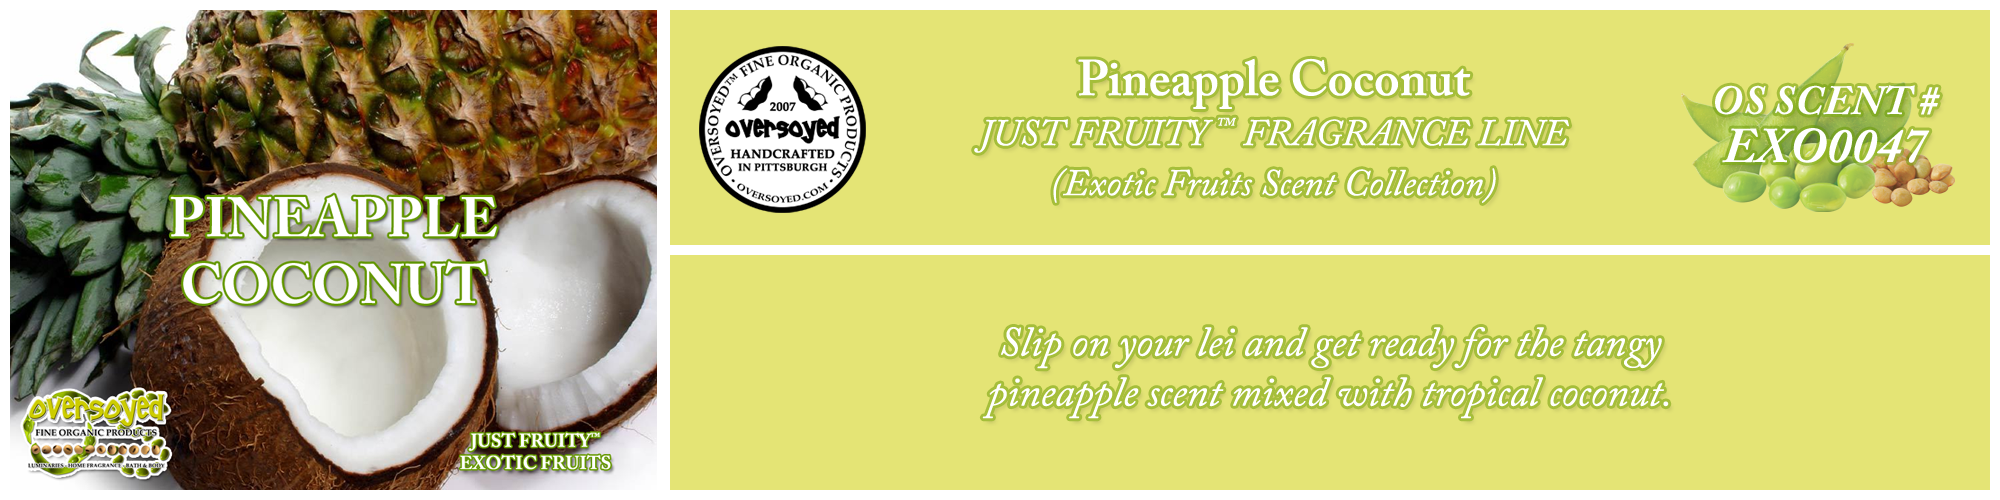 Pineapple Coconut Handcrafted Products Collection